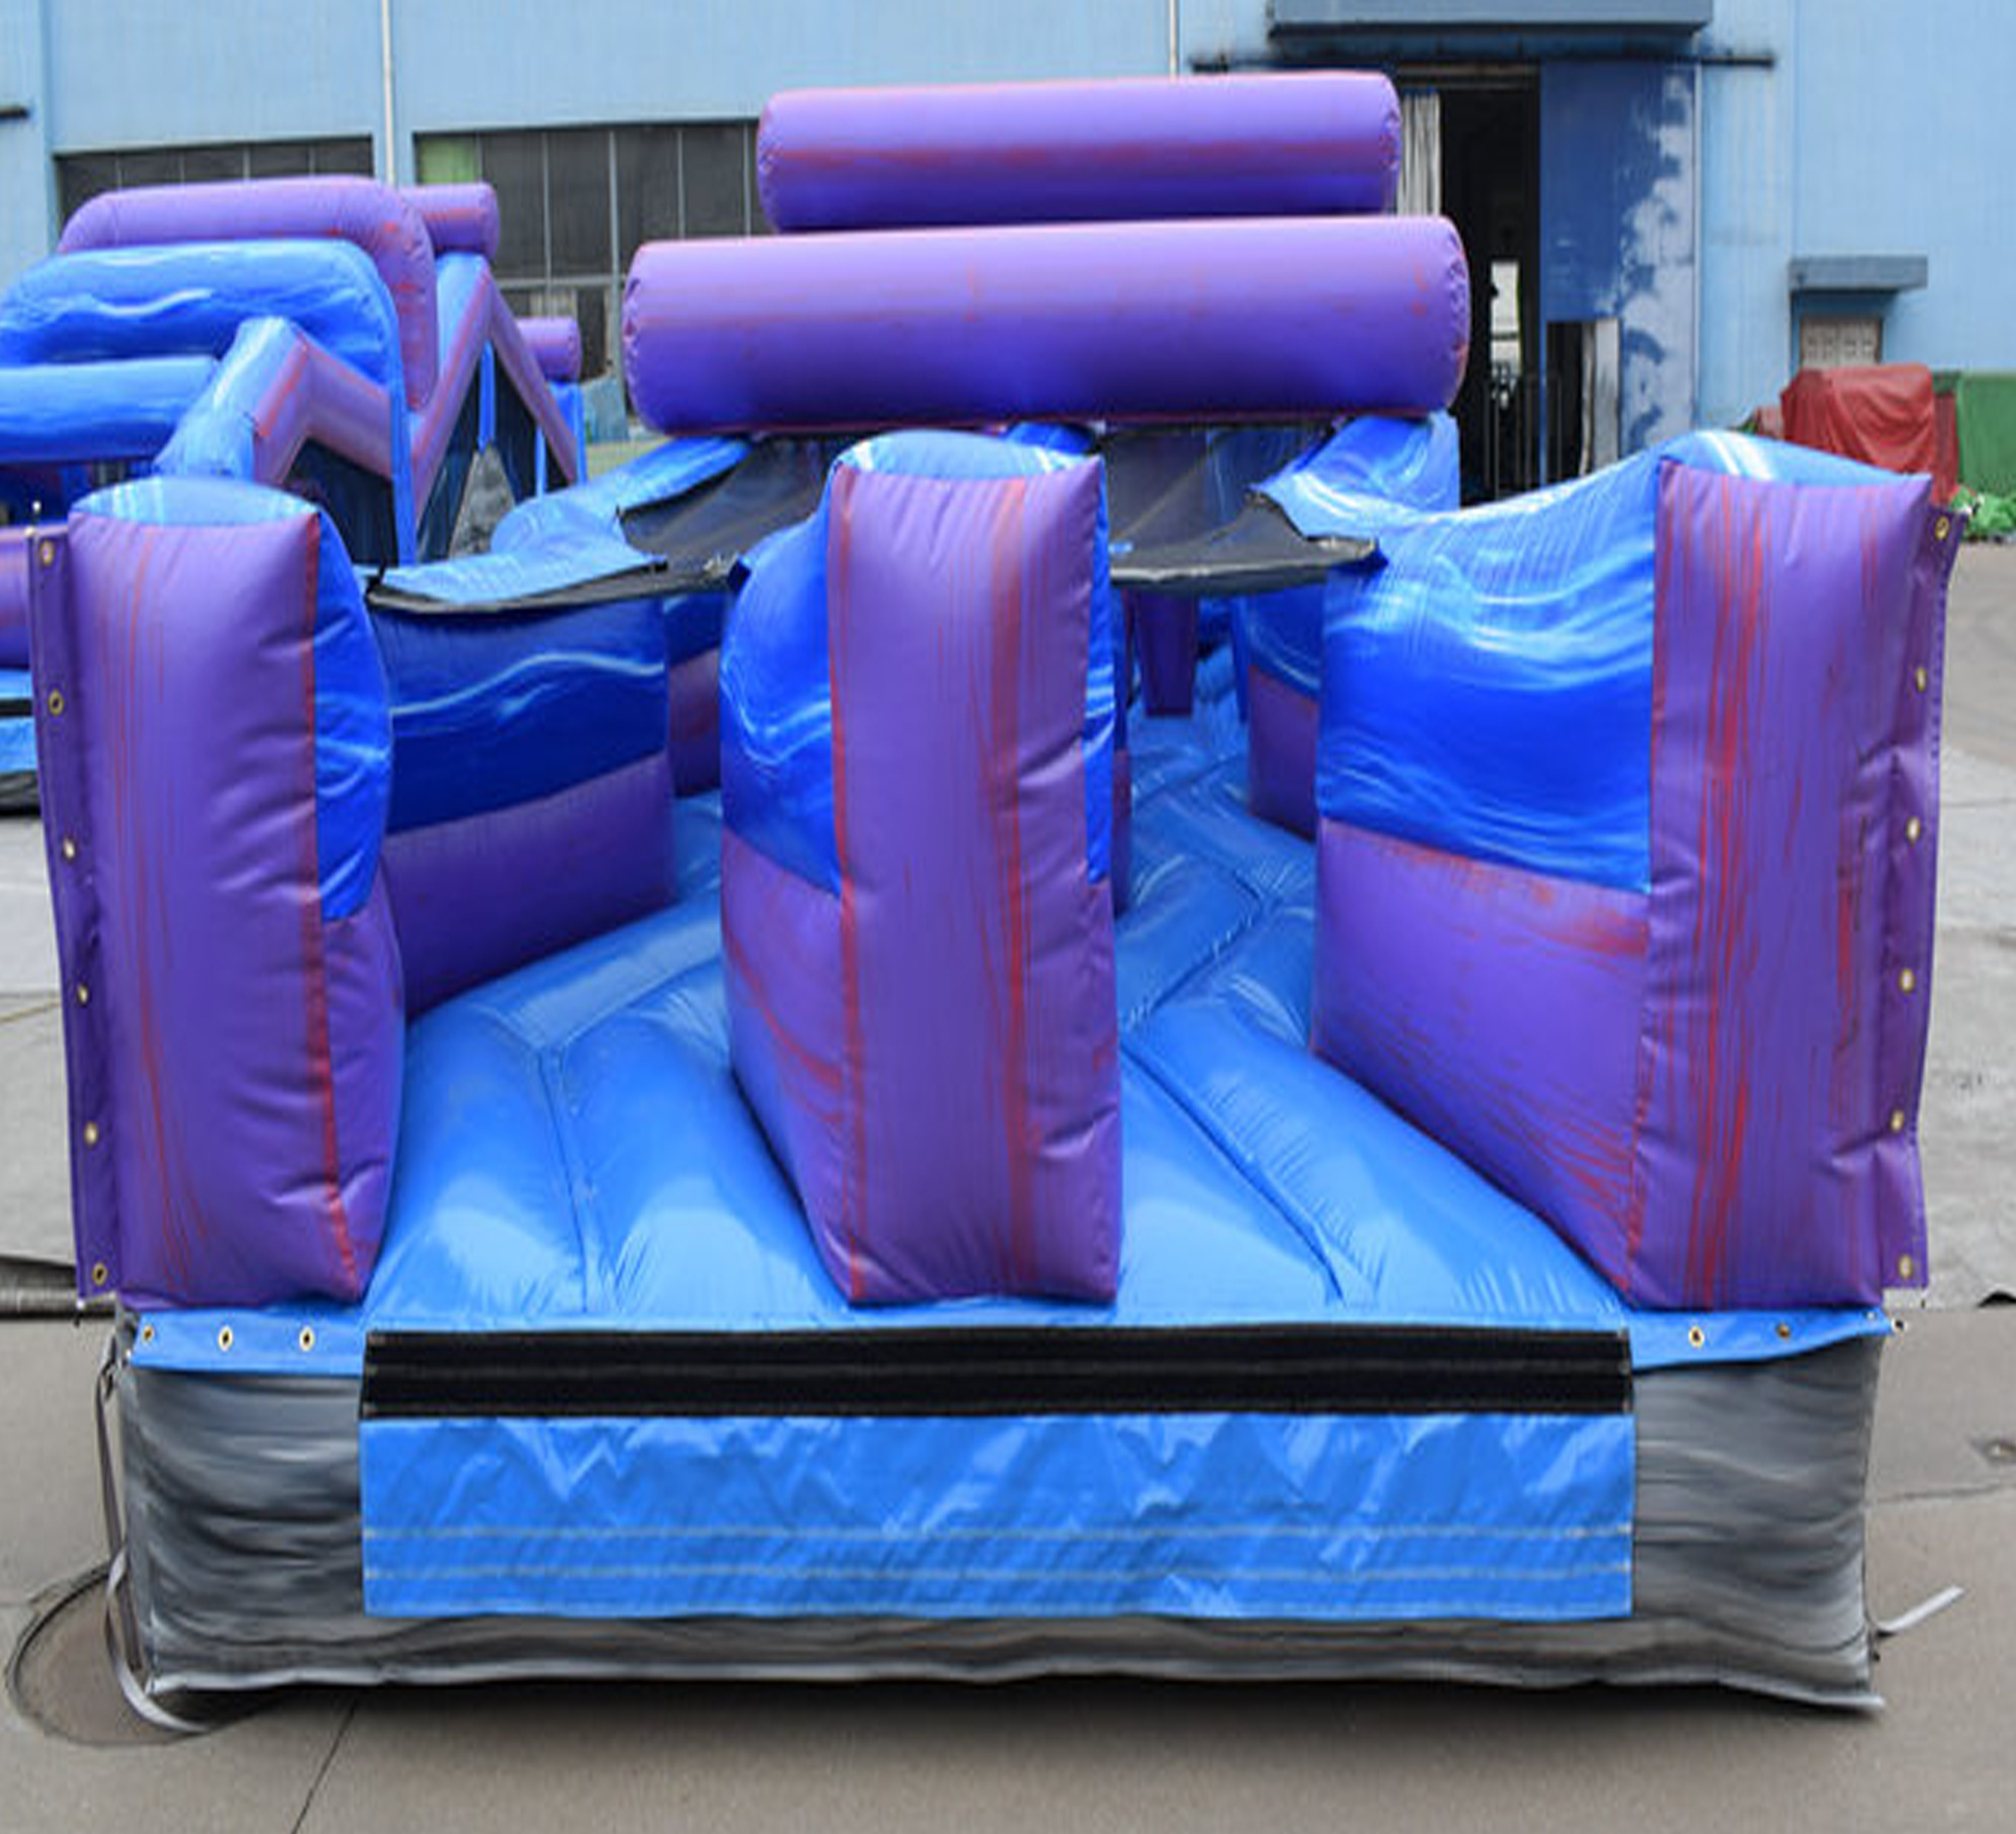 obstacle course Rentals Chattanooga TN 